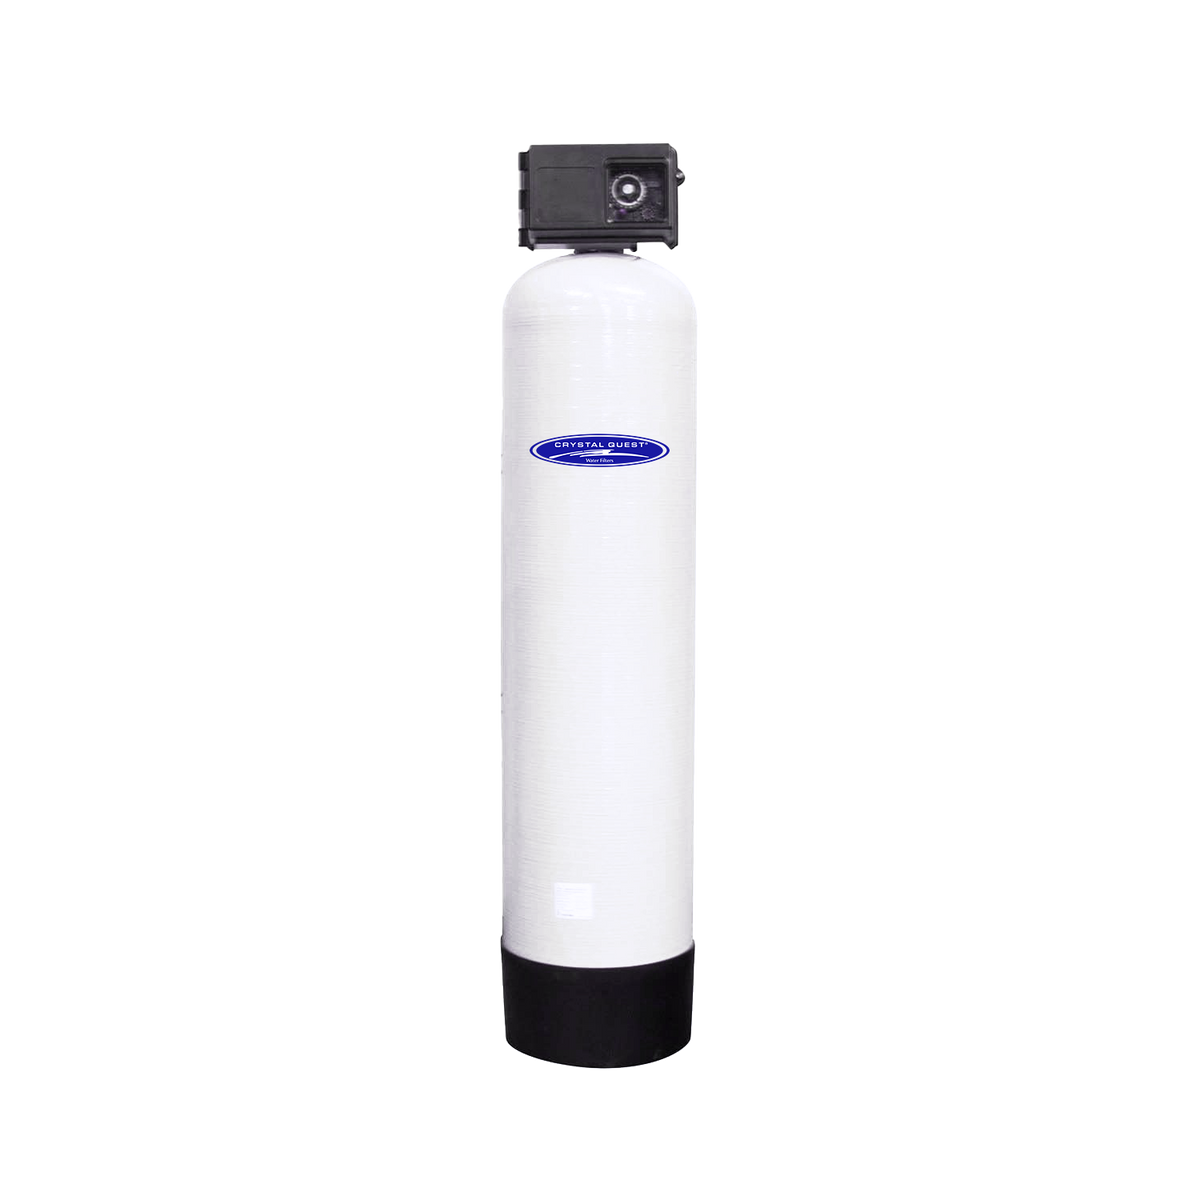 20 GPM / Calcium GAC / Automatic Fluoride Removal Water Filtration System - Commercial - Crystal Quest